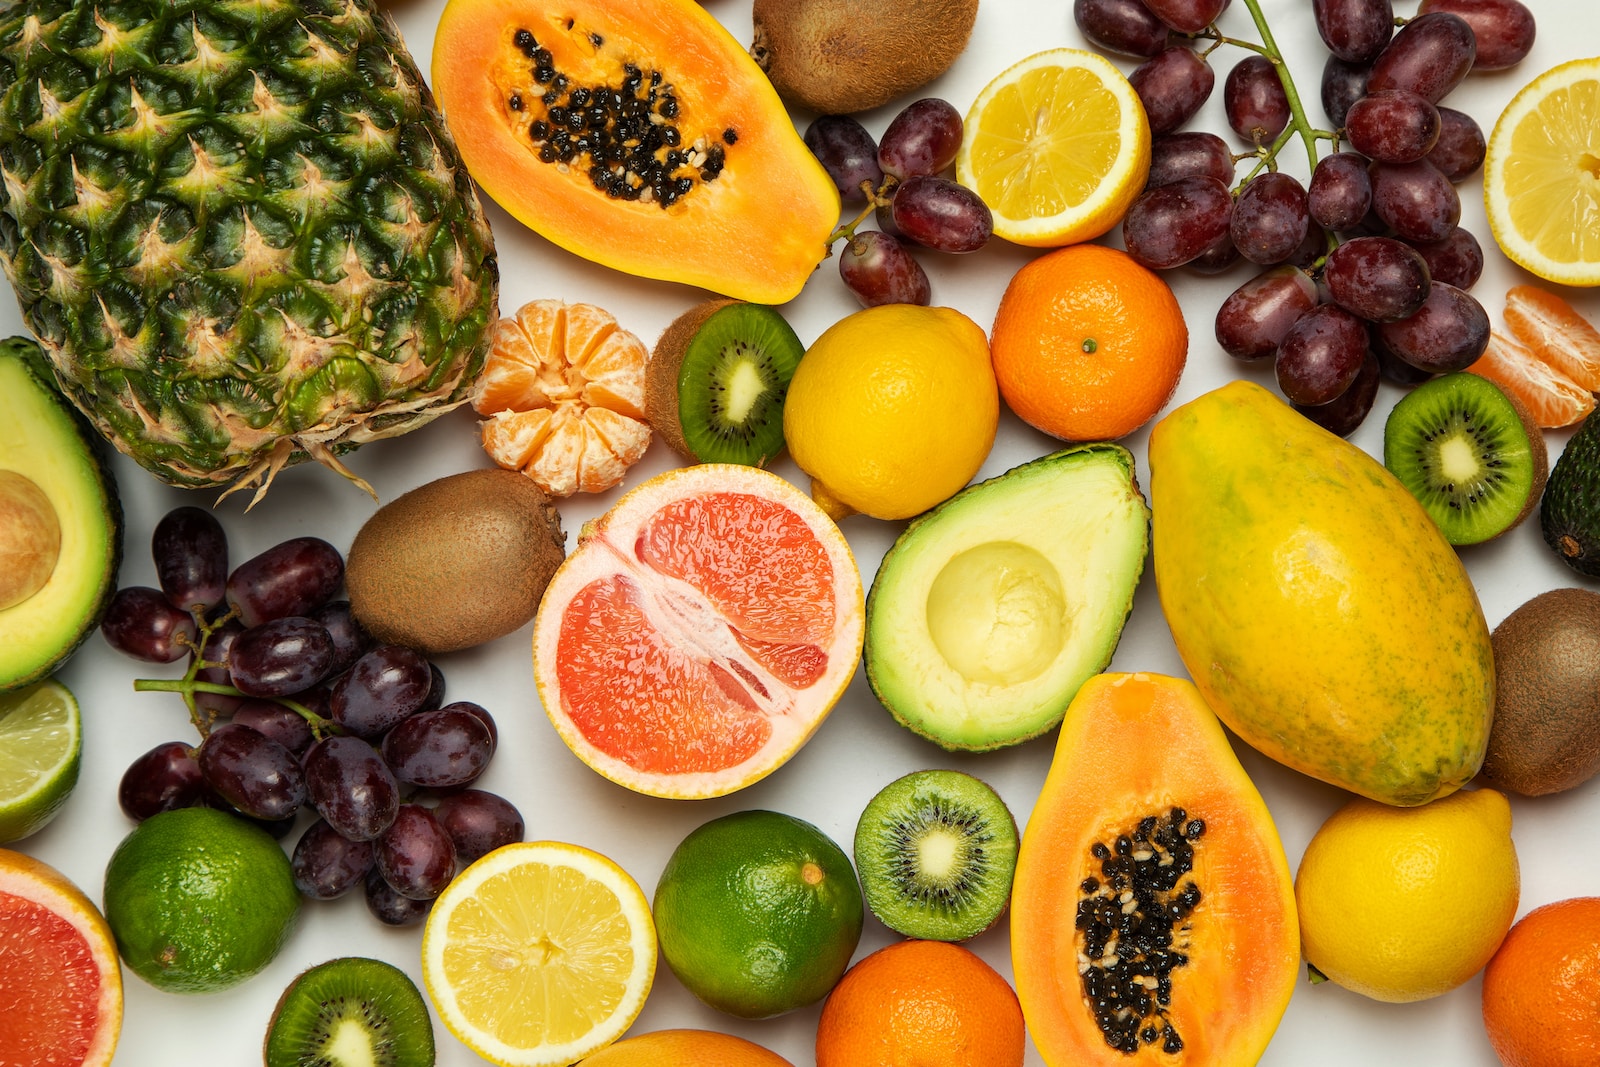 Top 5 Fruits to Boost Health and Immunity this Rainy Season